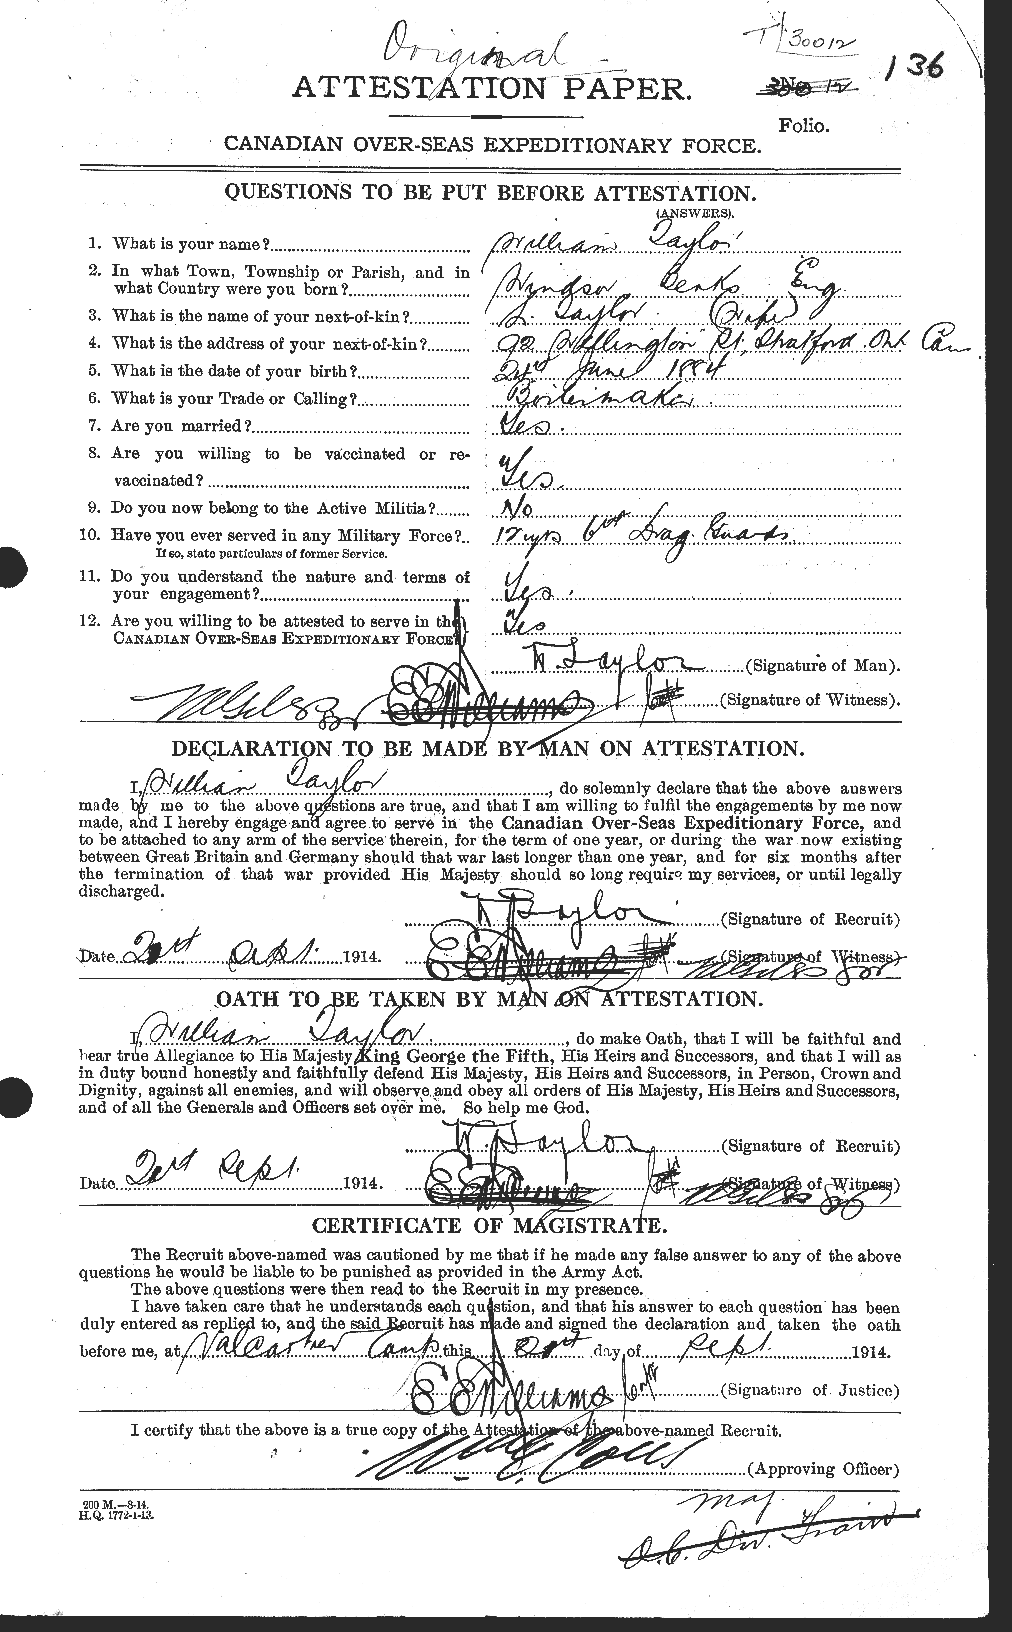 Personnel Records of the First World War - CEF 628142a